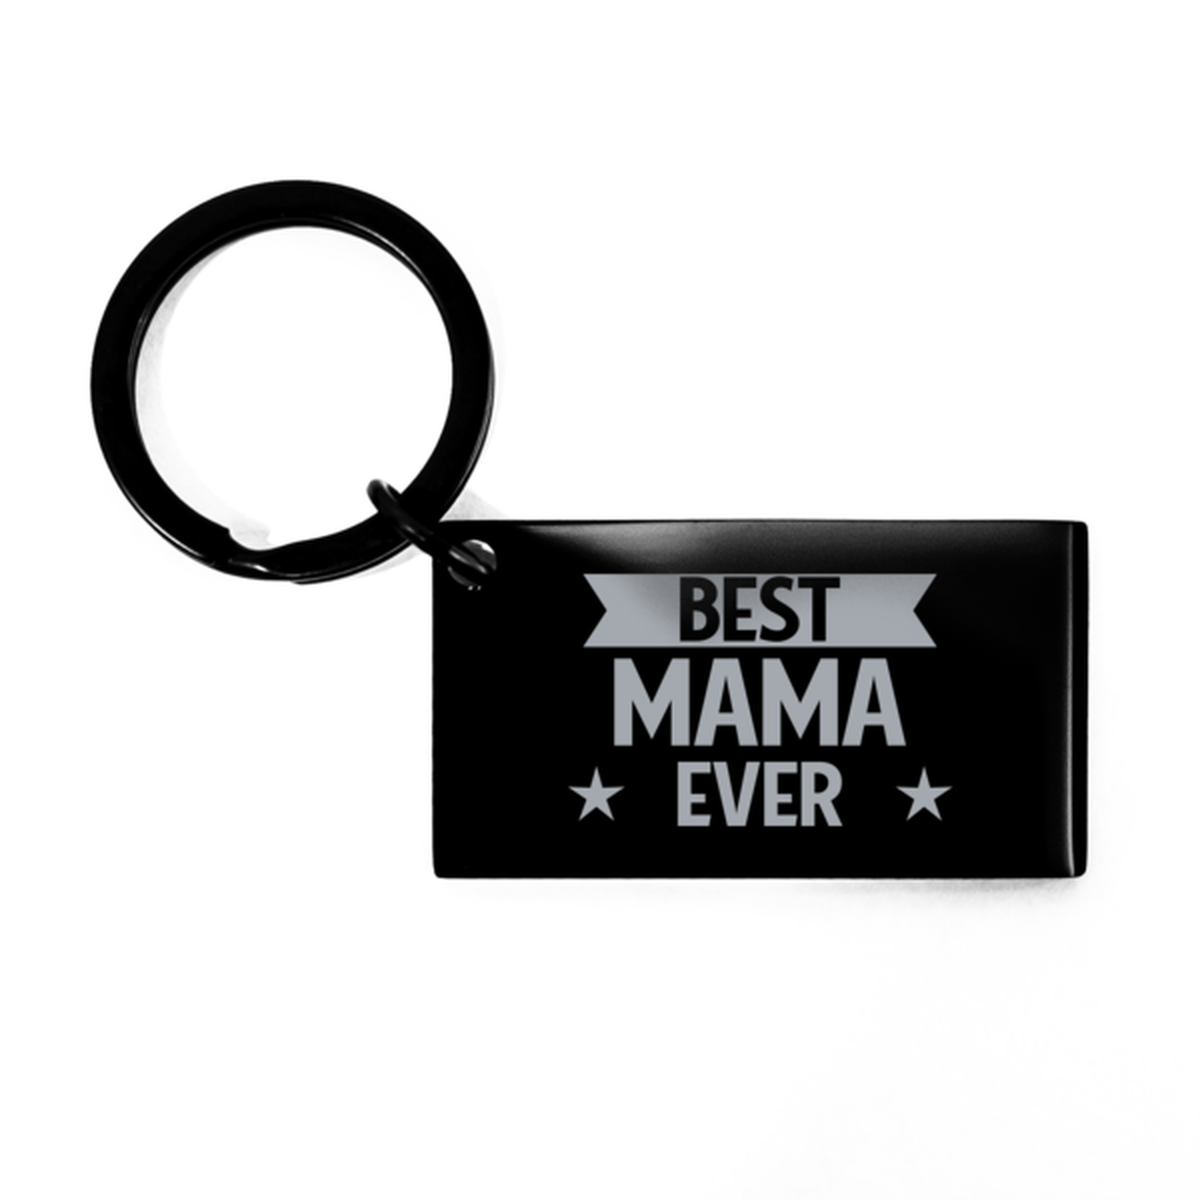 Best Mama Ever Mama Gifts, Funny Black Keychain For Mama, Birthday Engraved Keyring Presents For Women